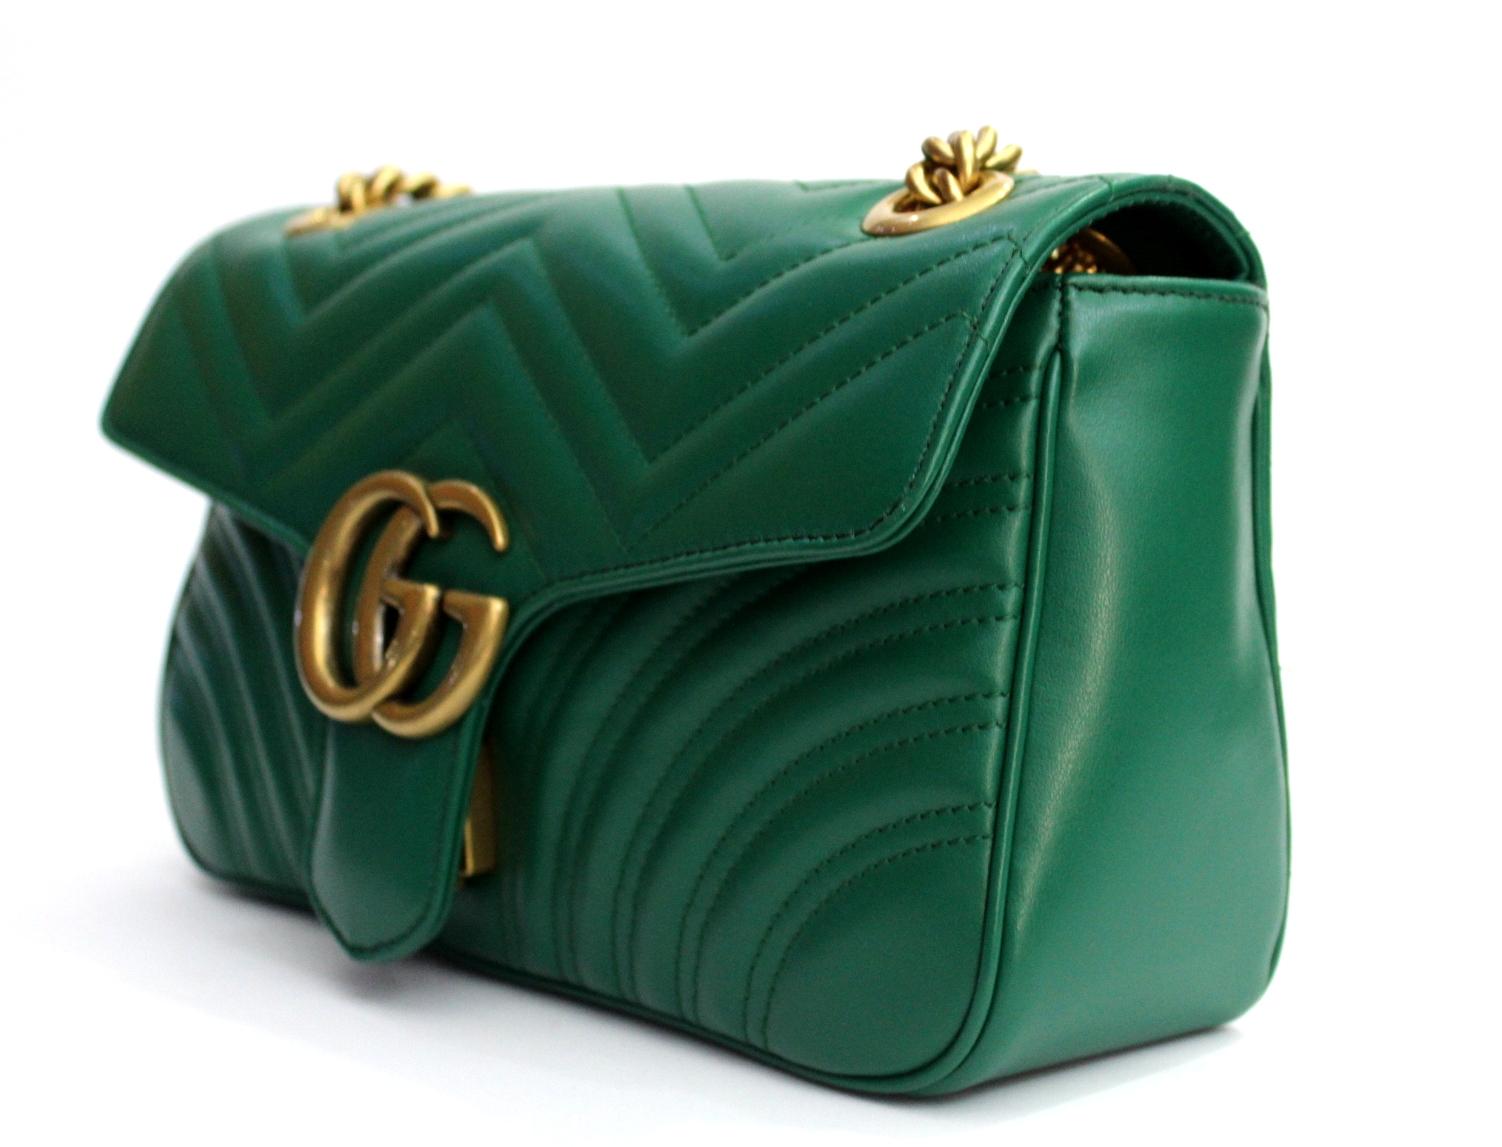 From the seventies style this Gucci bag is today a trendy symbol. This model is the average size, that of 26 cm, and is produced in green matelassè leather with oversize GG logo. Thanks to the shoulder strap with sliding chain the small size model